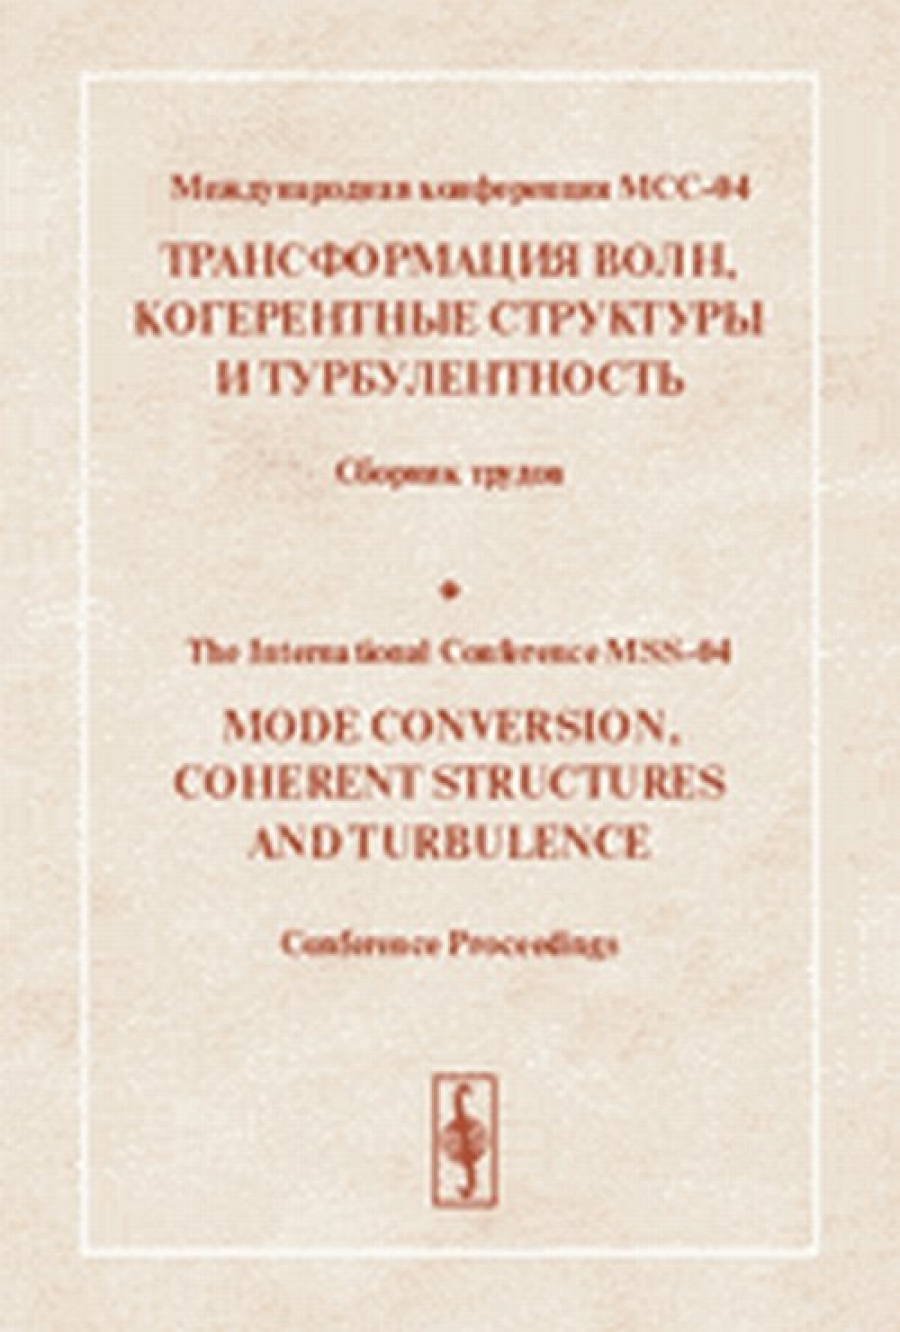  ..,  ..  .   -04  ,    . 23-25  2004 .//International Conference MSS-04. Mode Conversion,Coherent Structures and Turbulences. 23--25 November 2004. Papers in English and Russian 